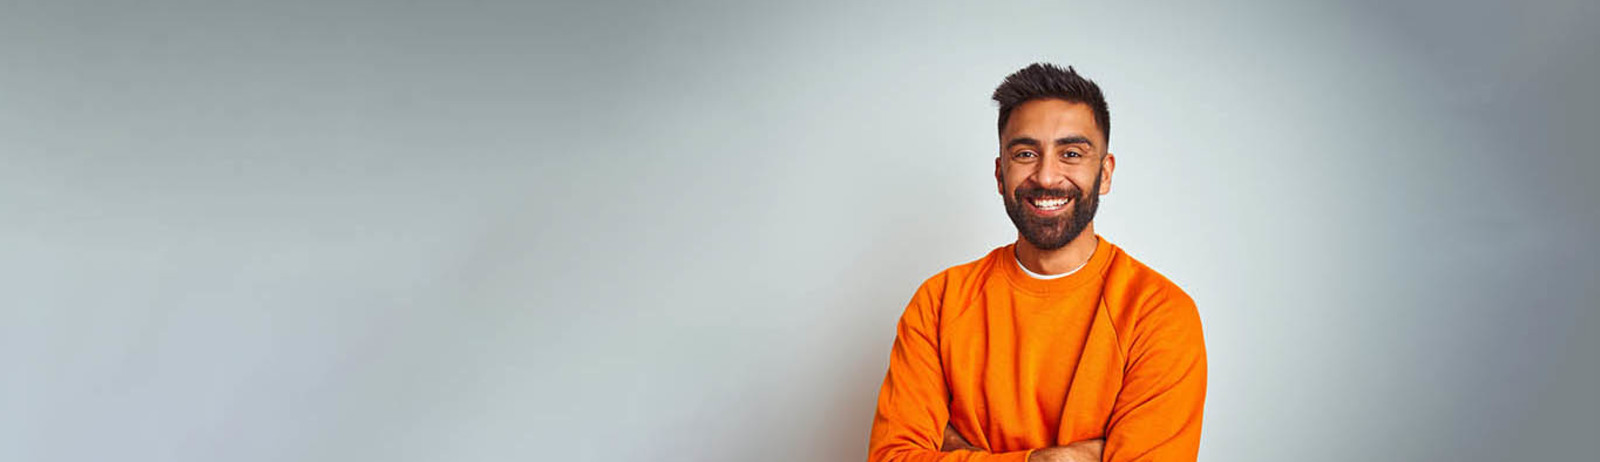 Young man wearing orange sweater over isolated white background happy face smiling with crossed arms looking at the camera.